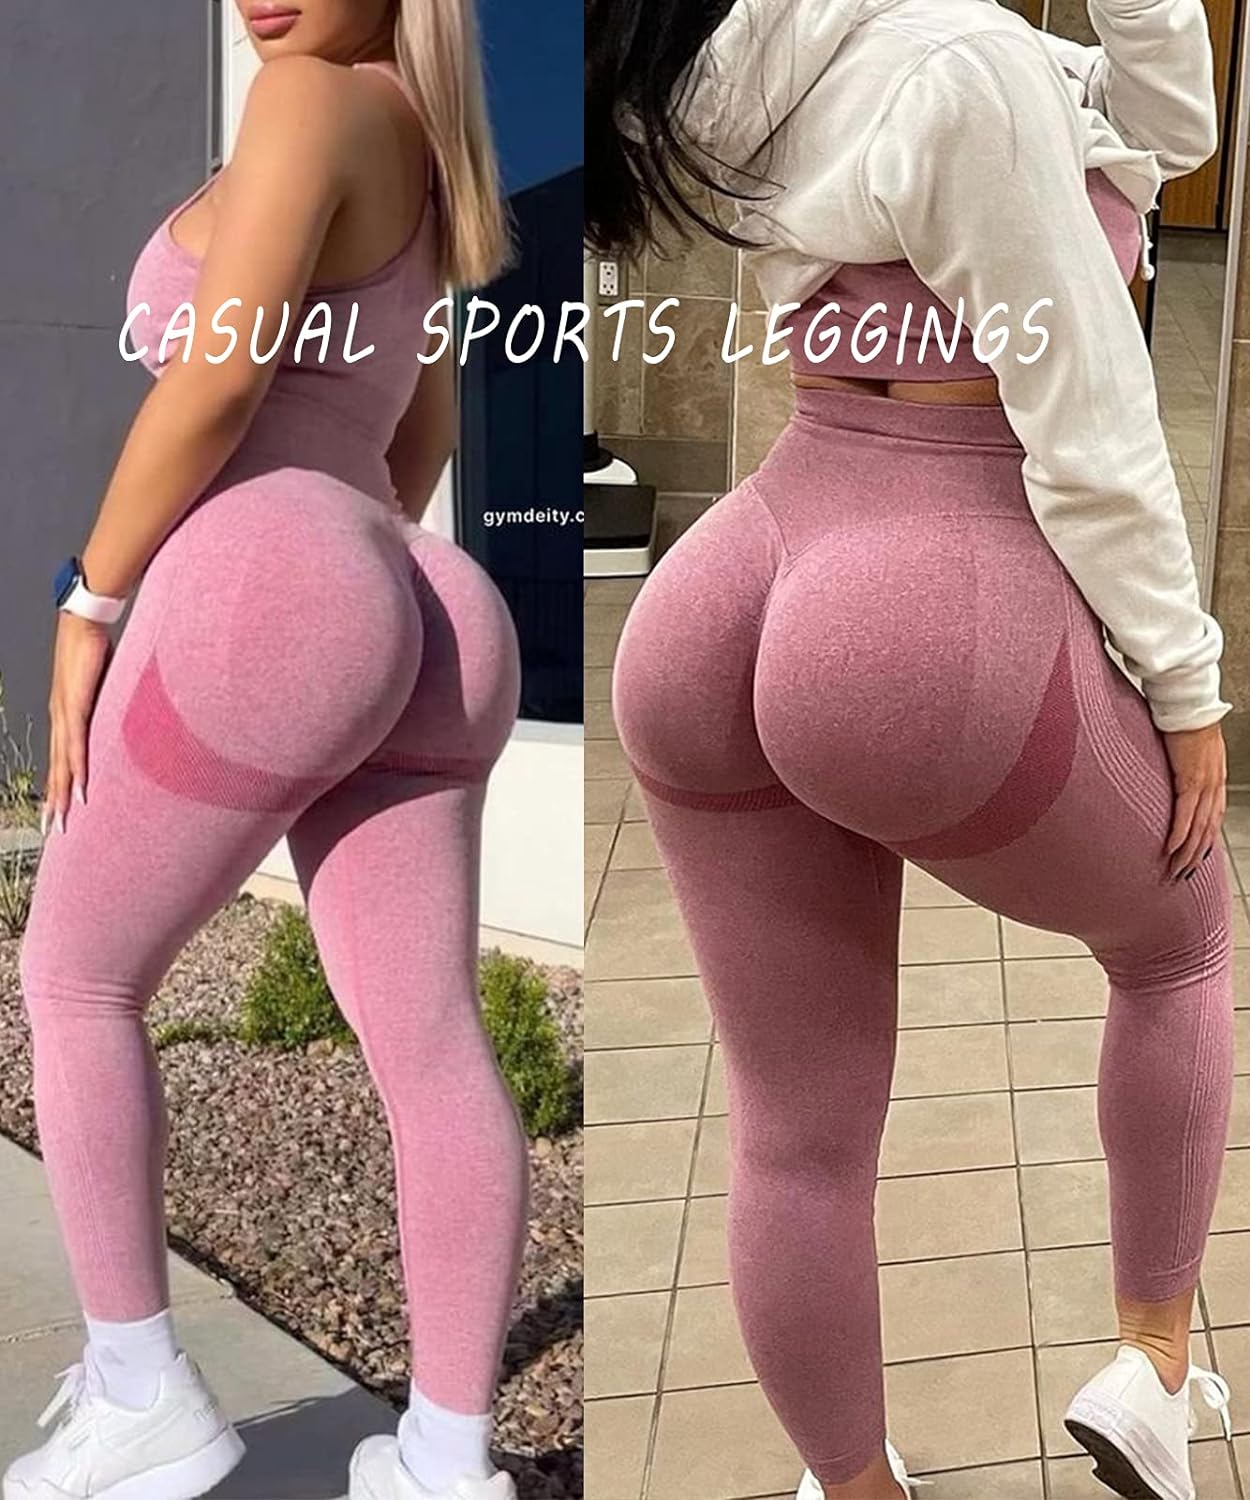 dave stonley reccomend latina in yoga pants pic